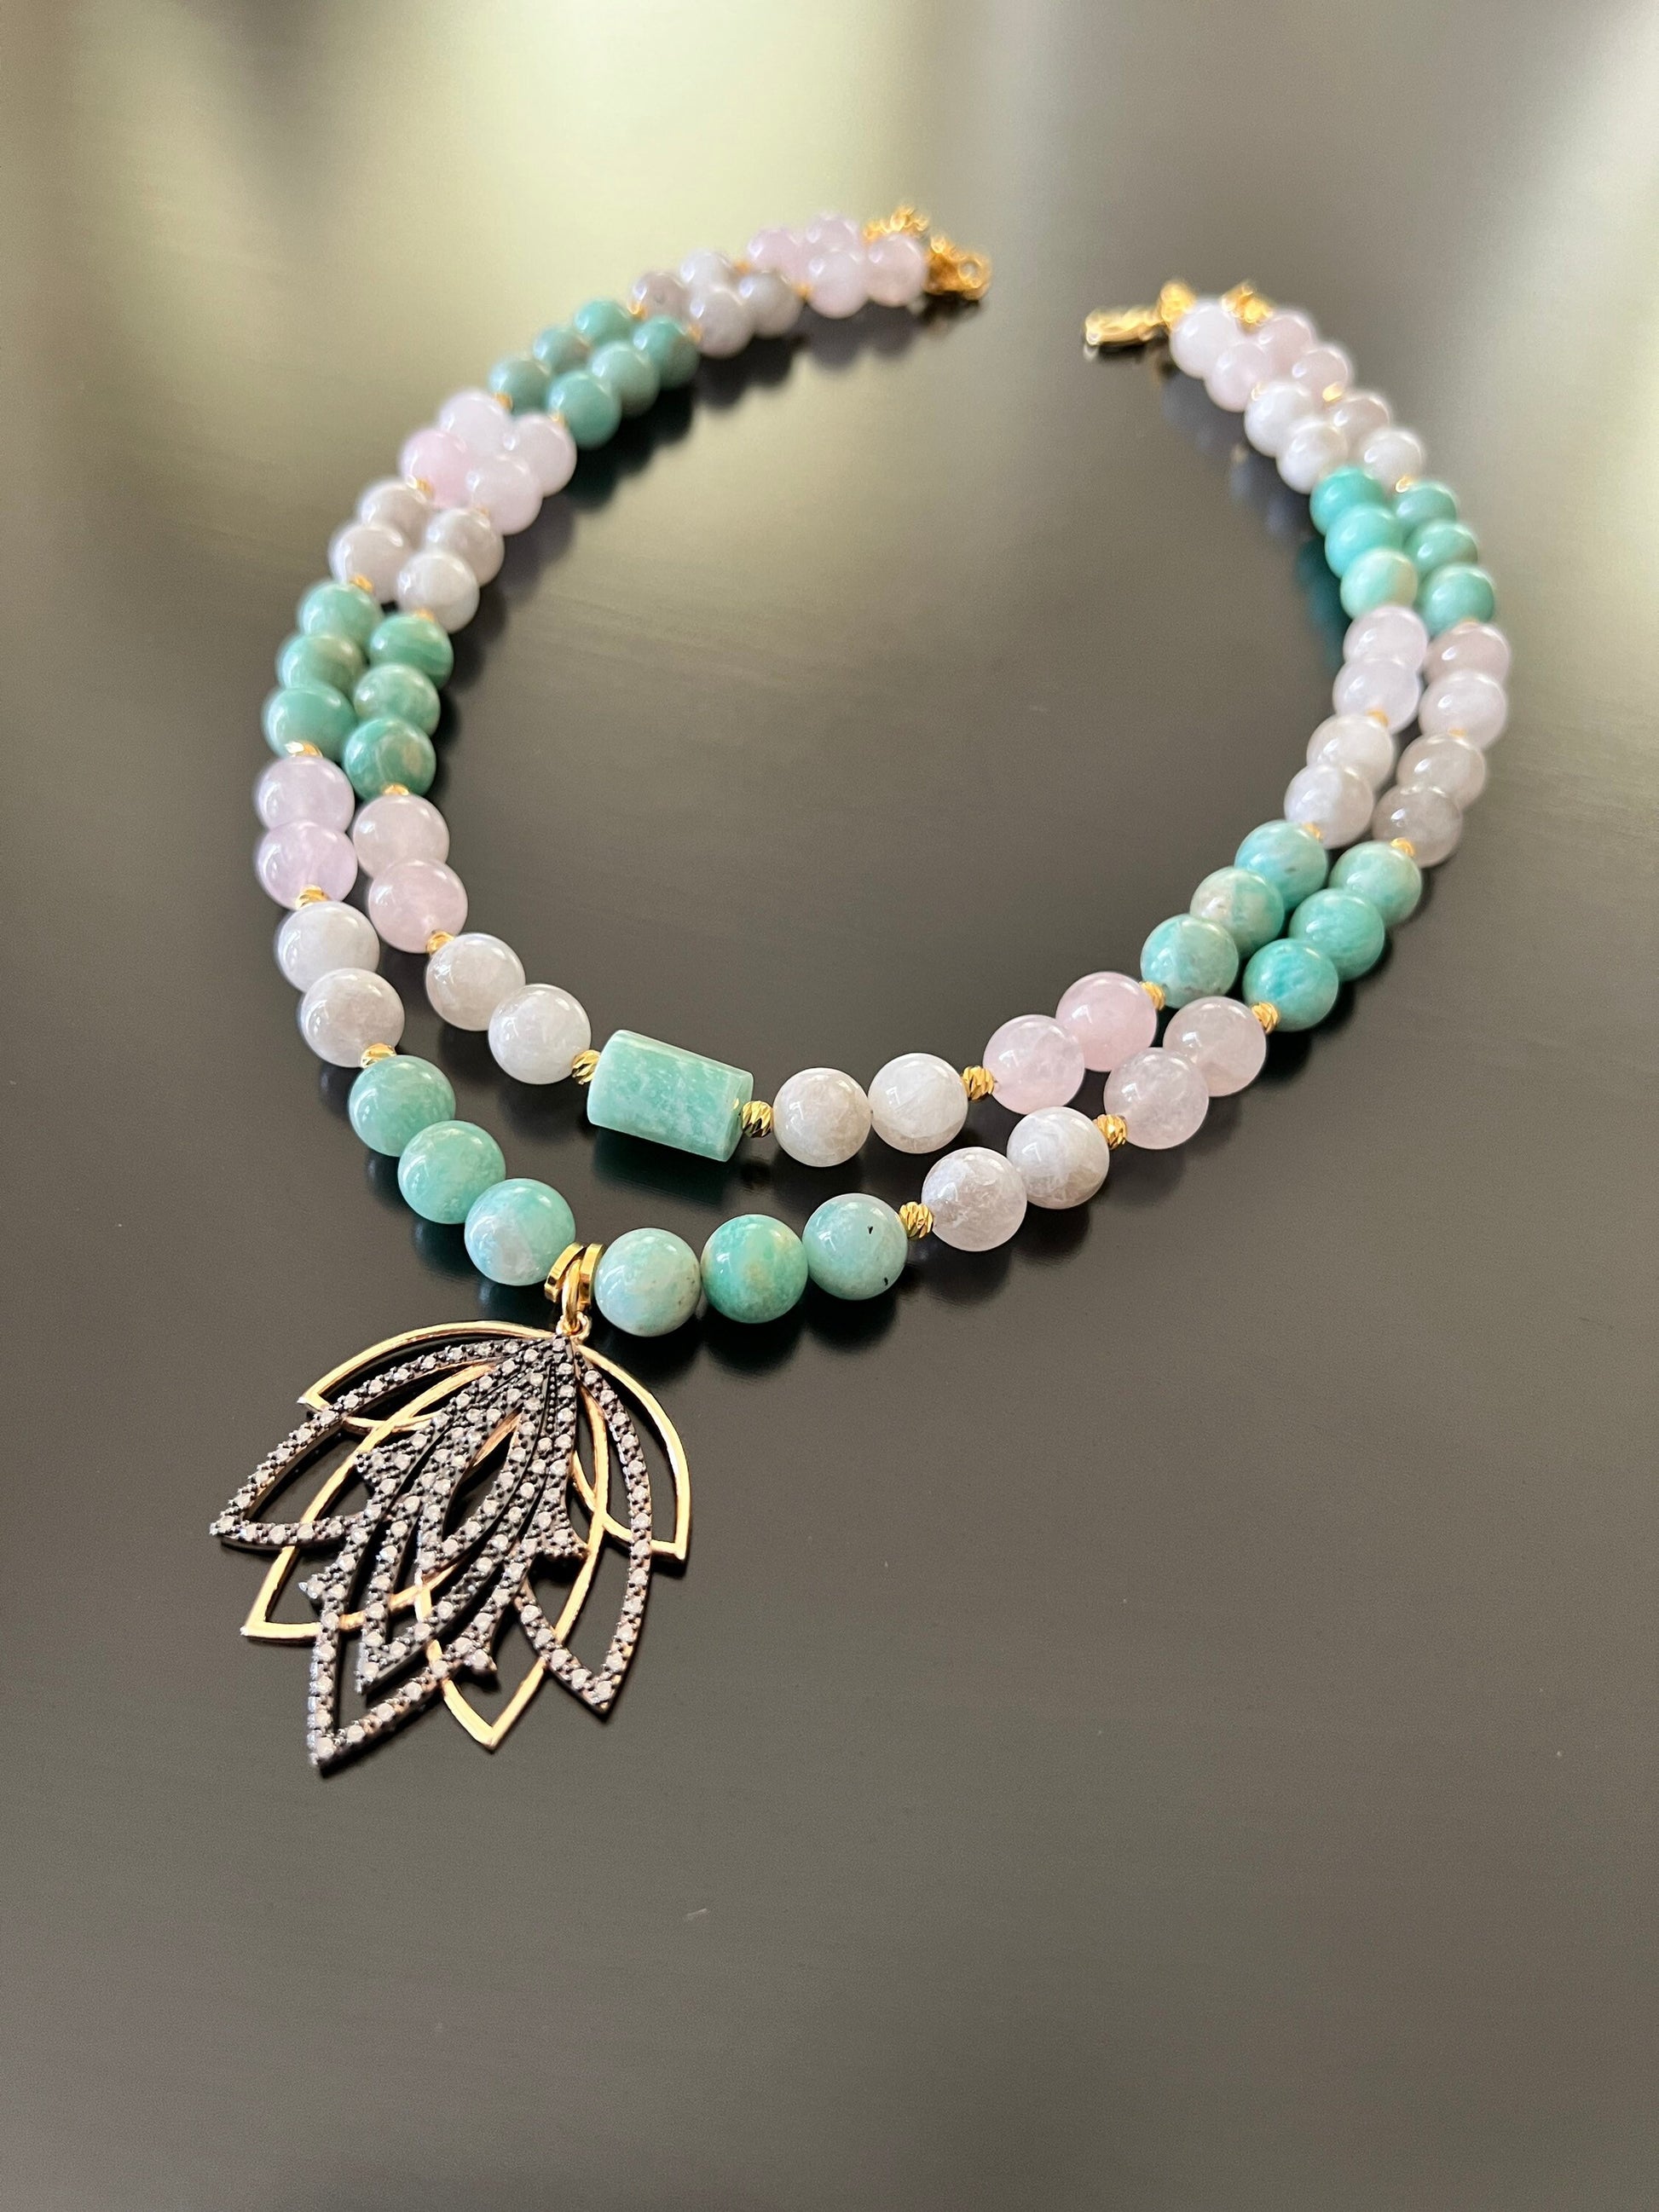 Mix Crystal Necklace, Beaded Moon Stone,Rose Quartz,Amazonite Necklace, Lotus Pendant Jewelry, Statement Necklace for Women, Gifts